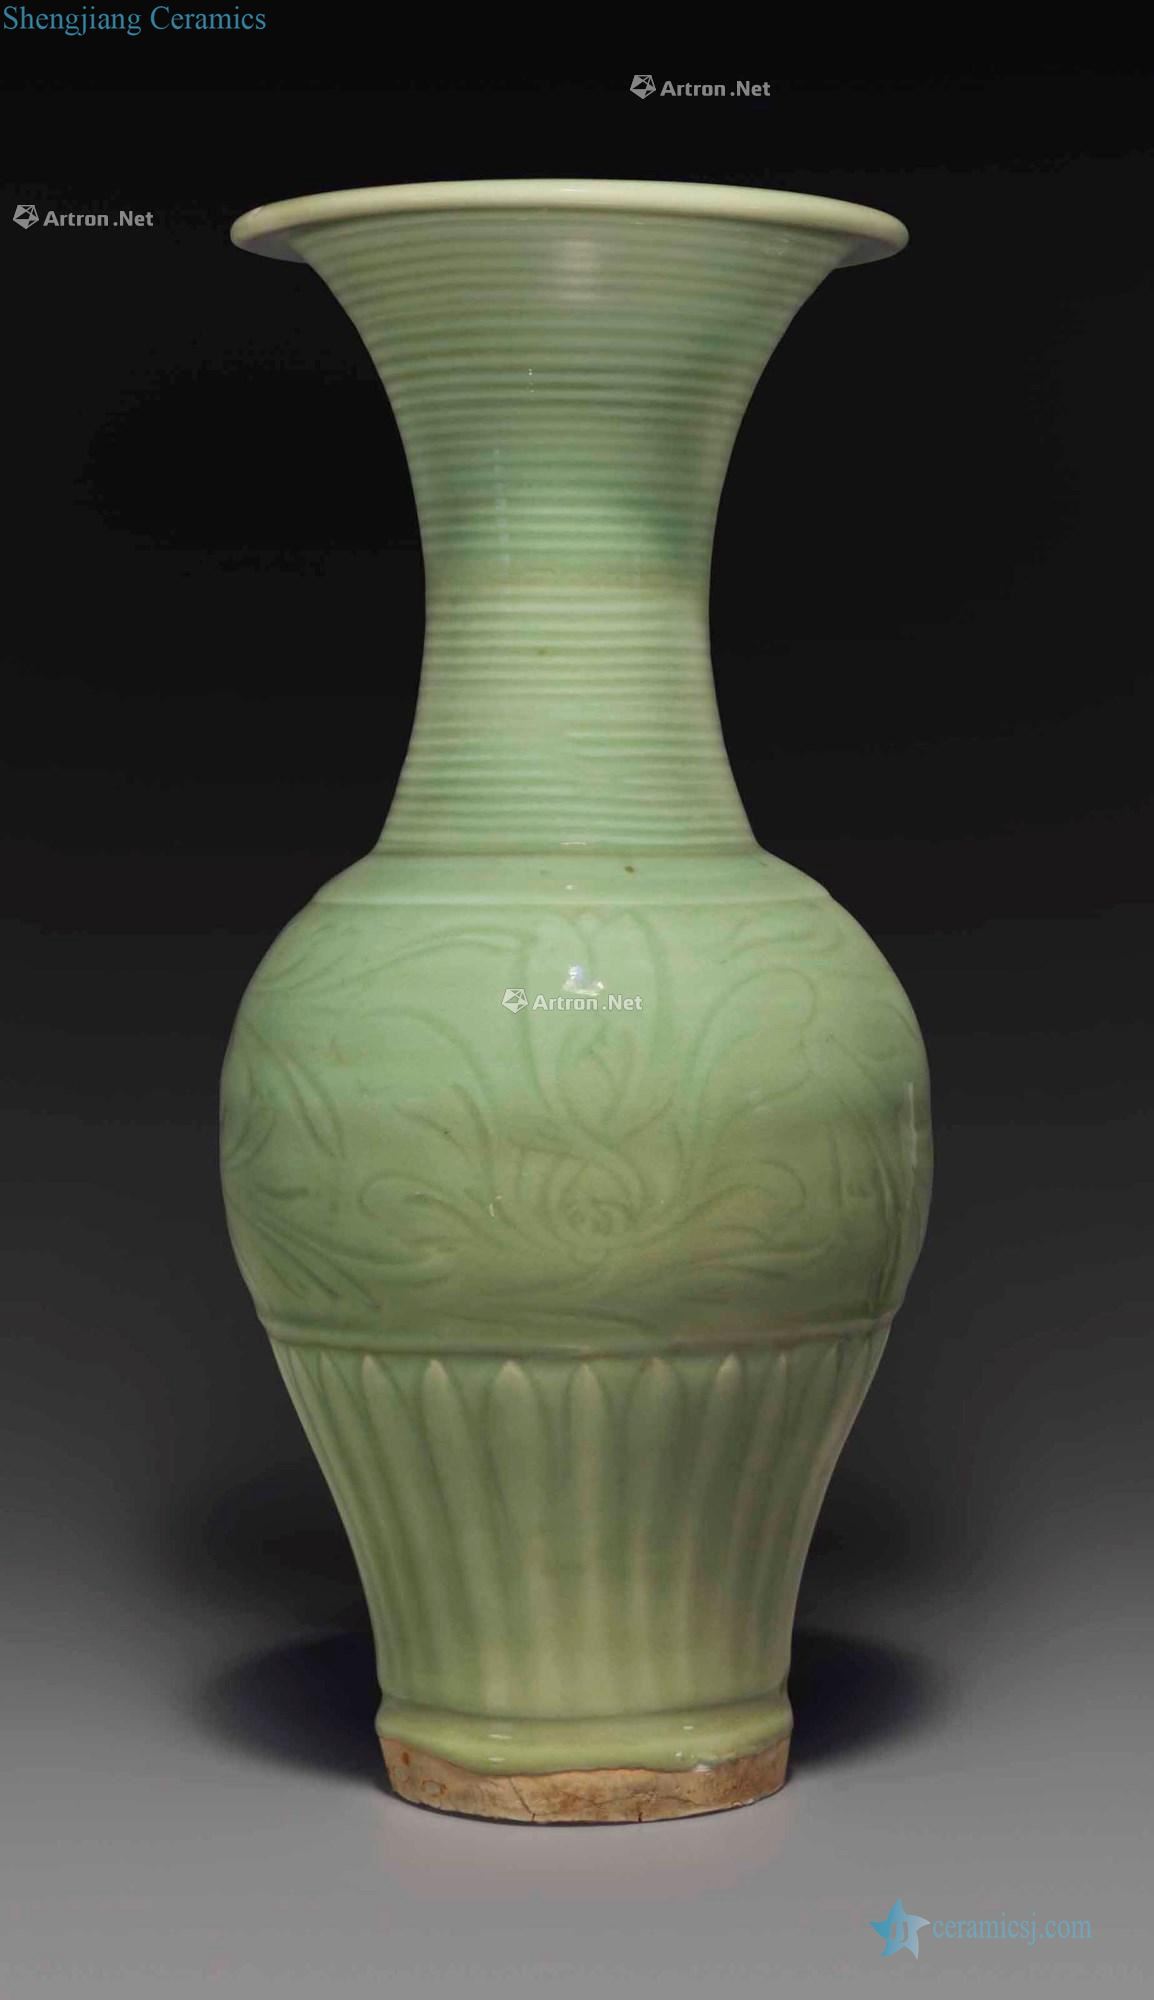 The Ming dynasty, A 14th century CARVED LONGQUAN CELADON "PHOENIX - TAIL" VASE